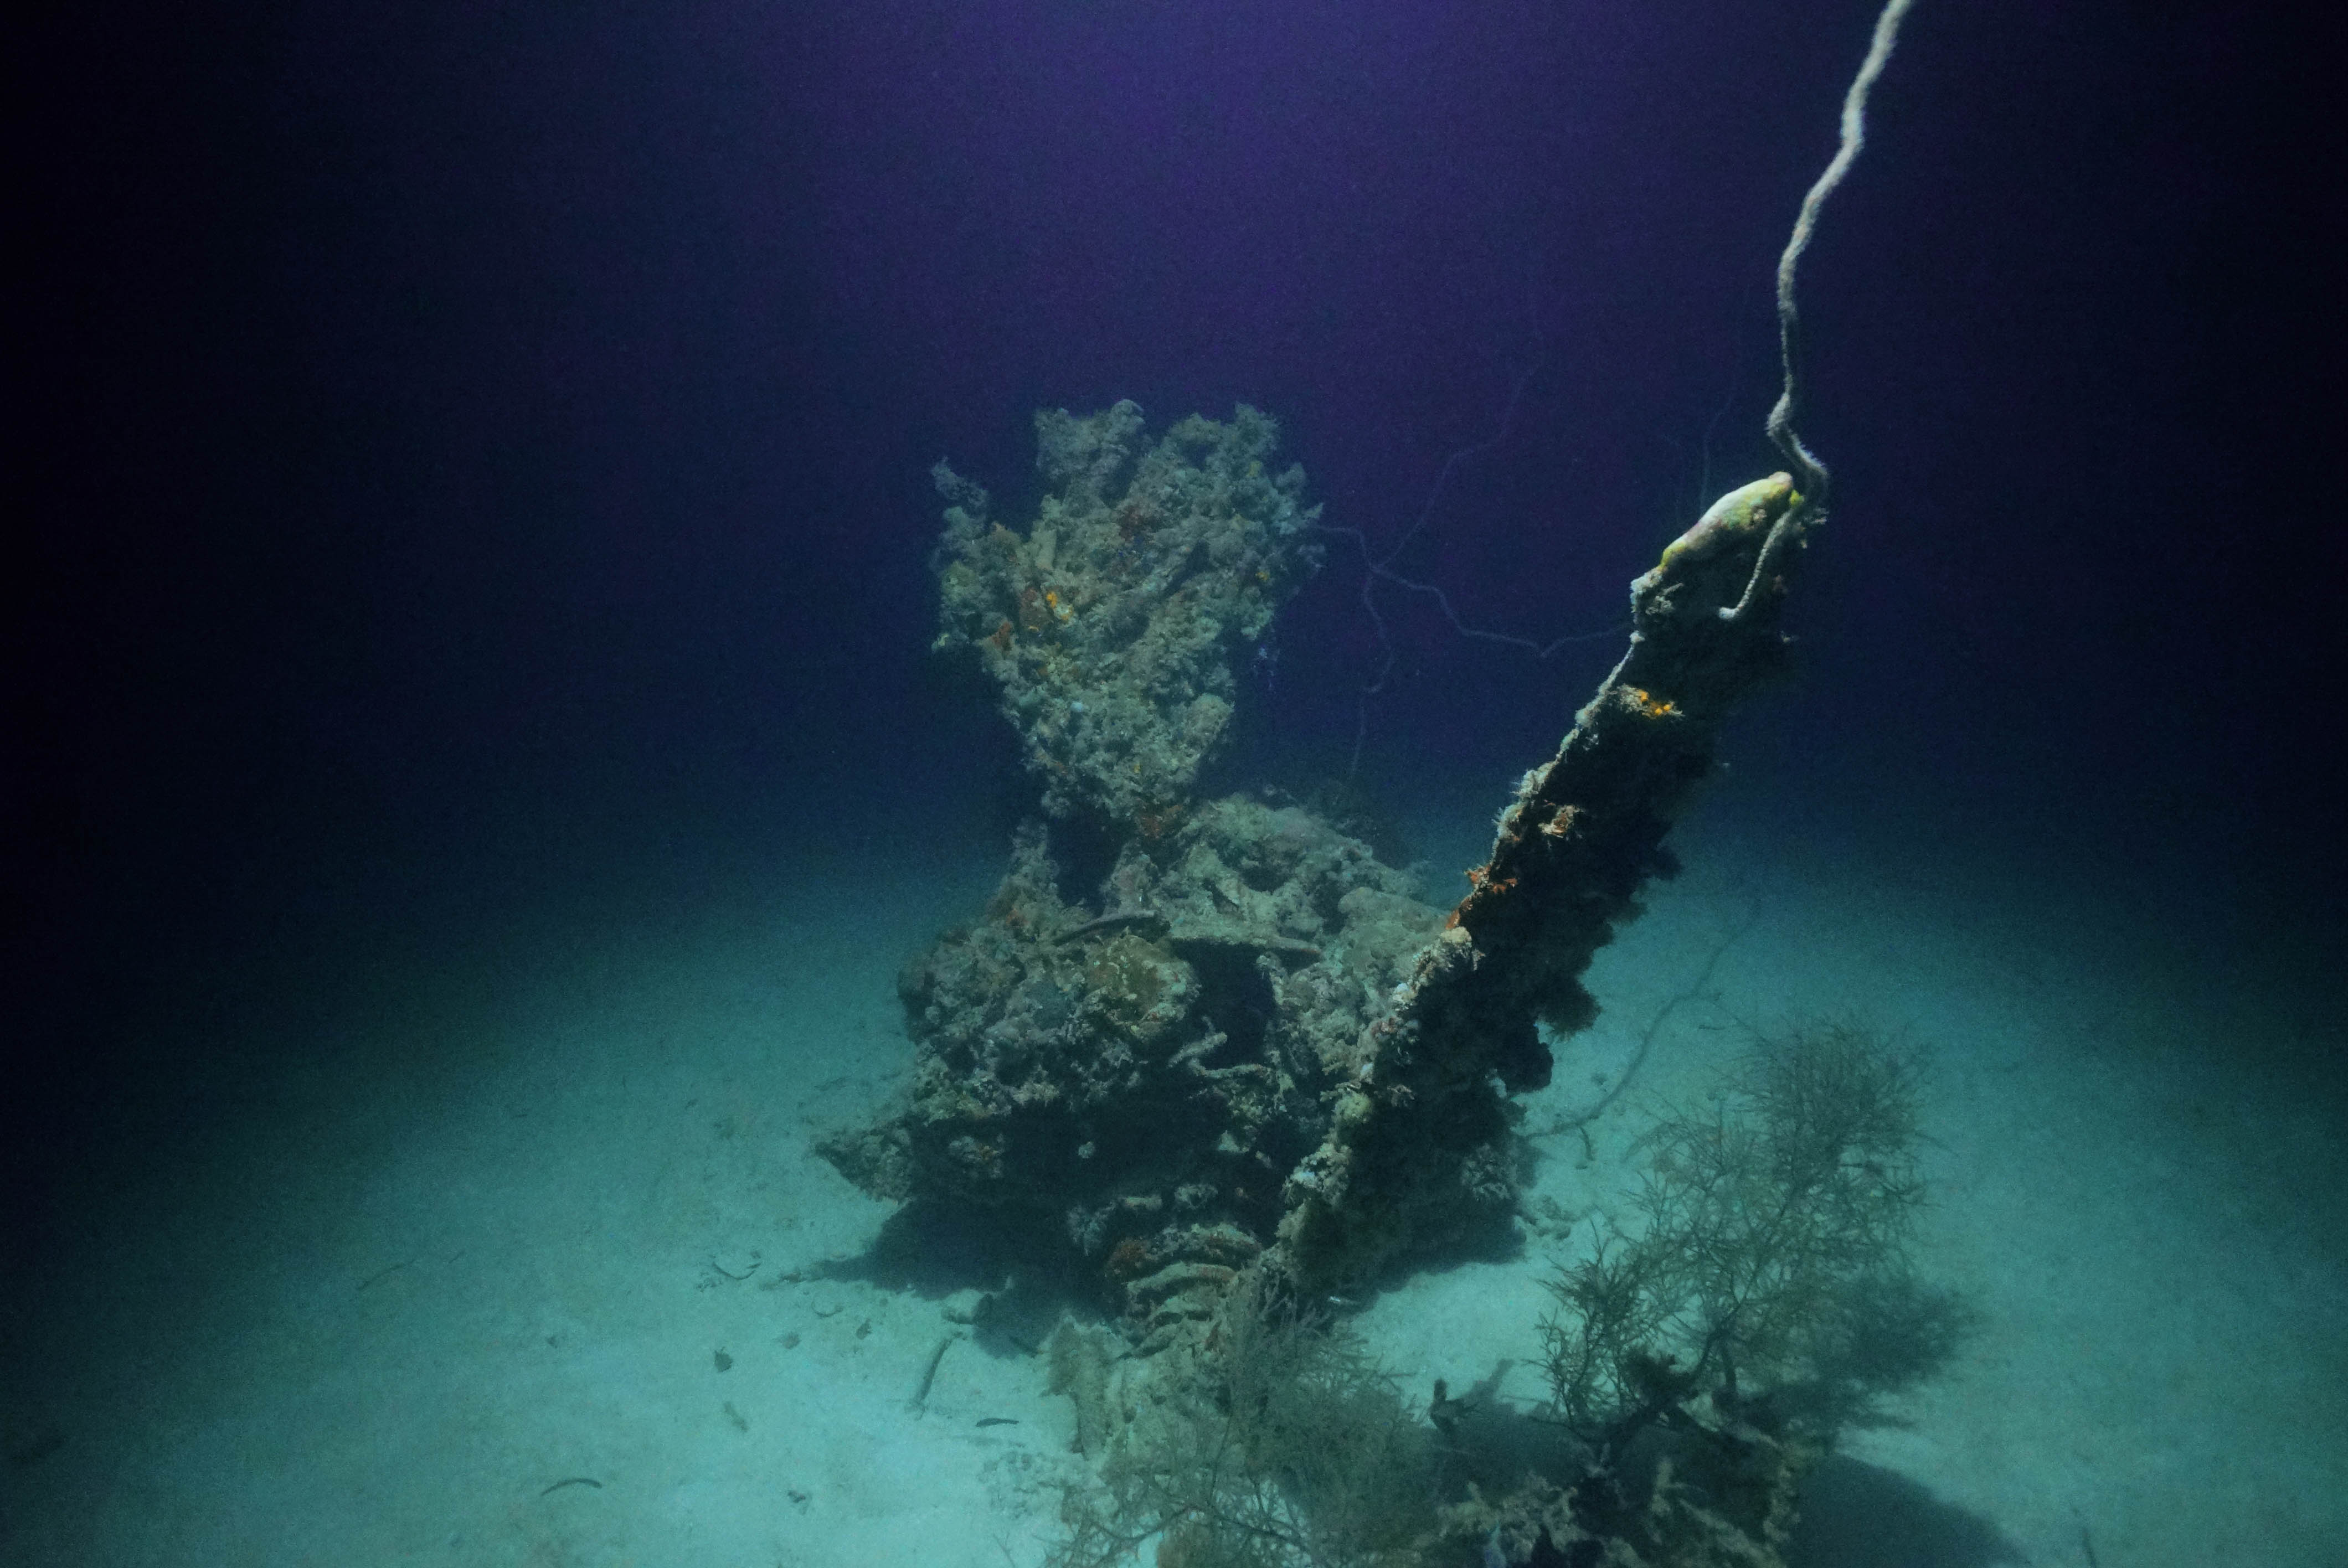 The remains of the missing Grumman TBM-1C Avenger. Photo Courtesy of Scripps Institution of Oceanography 